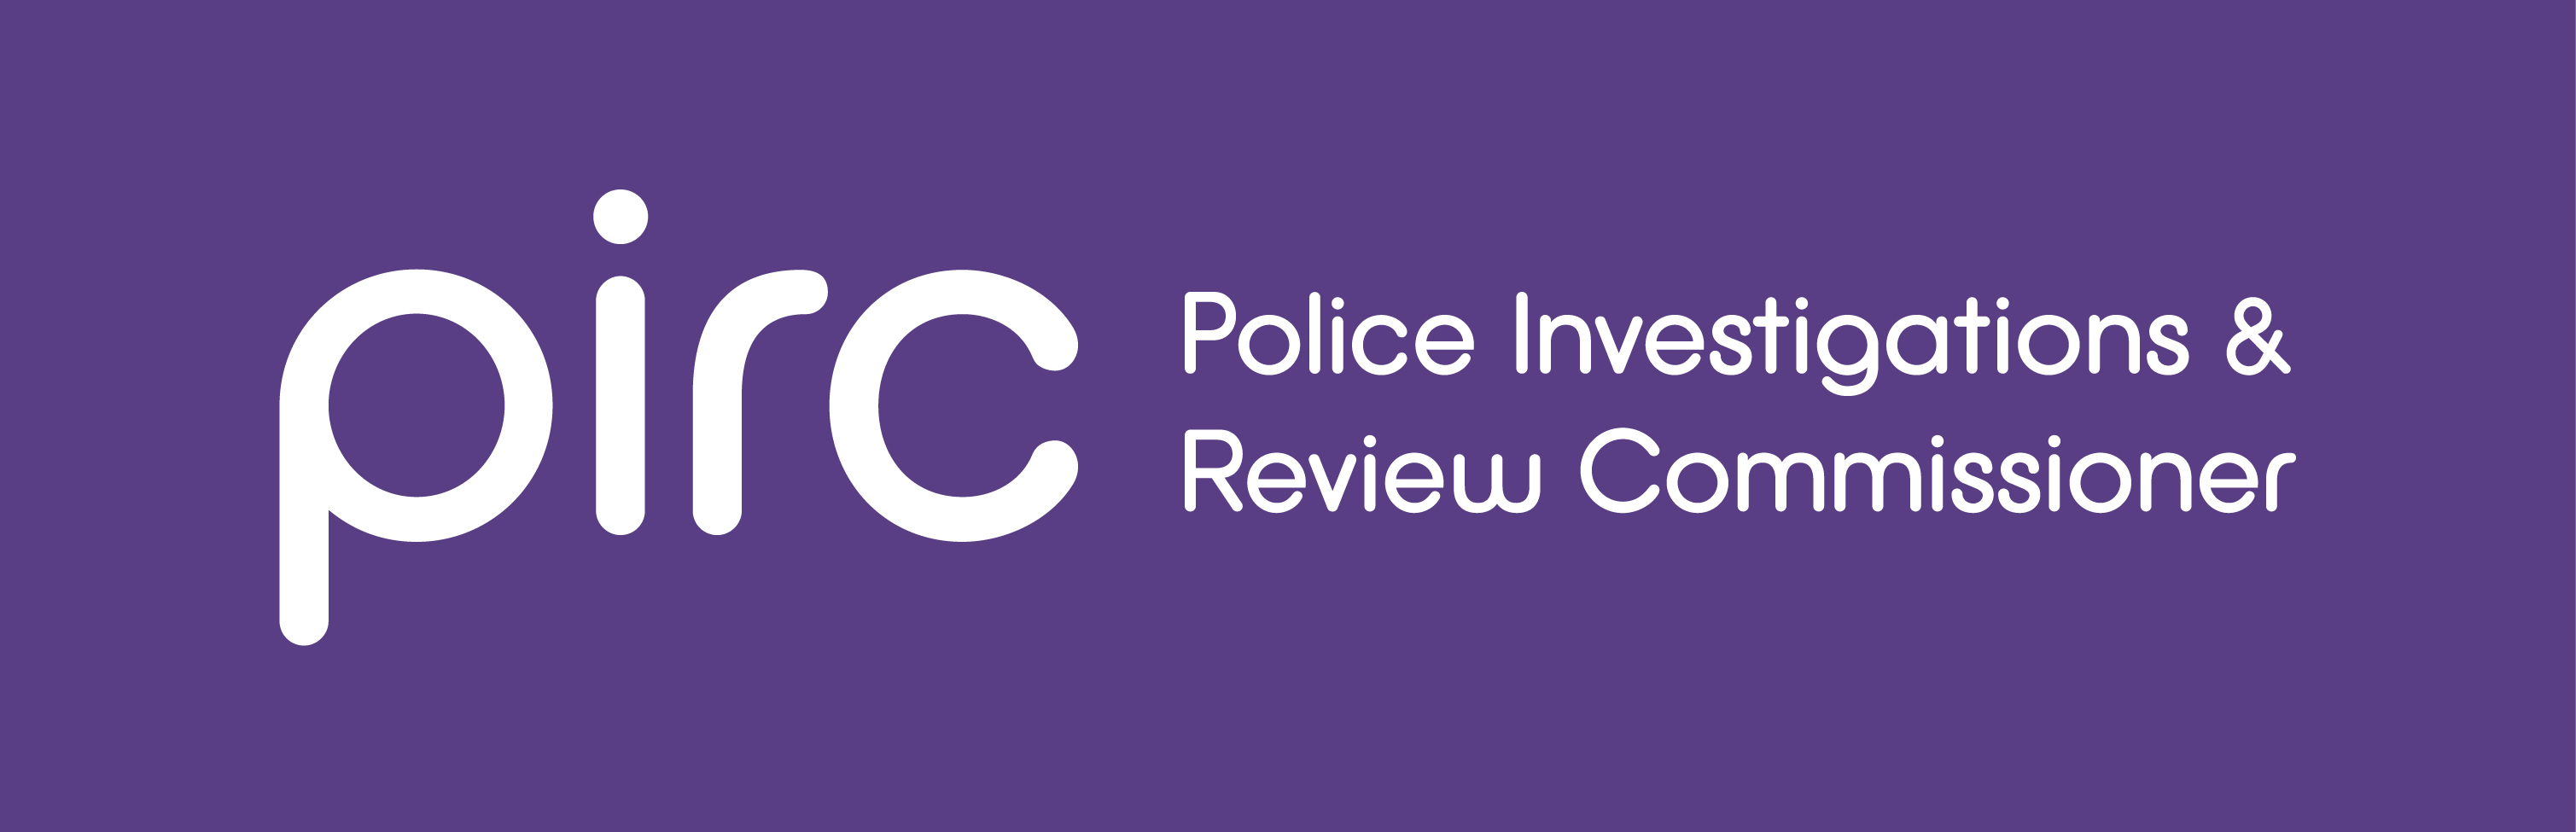 logo for Police Investigations & Review Commissioner (PIRC)